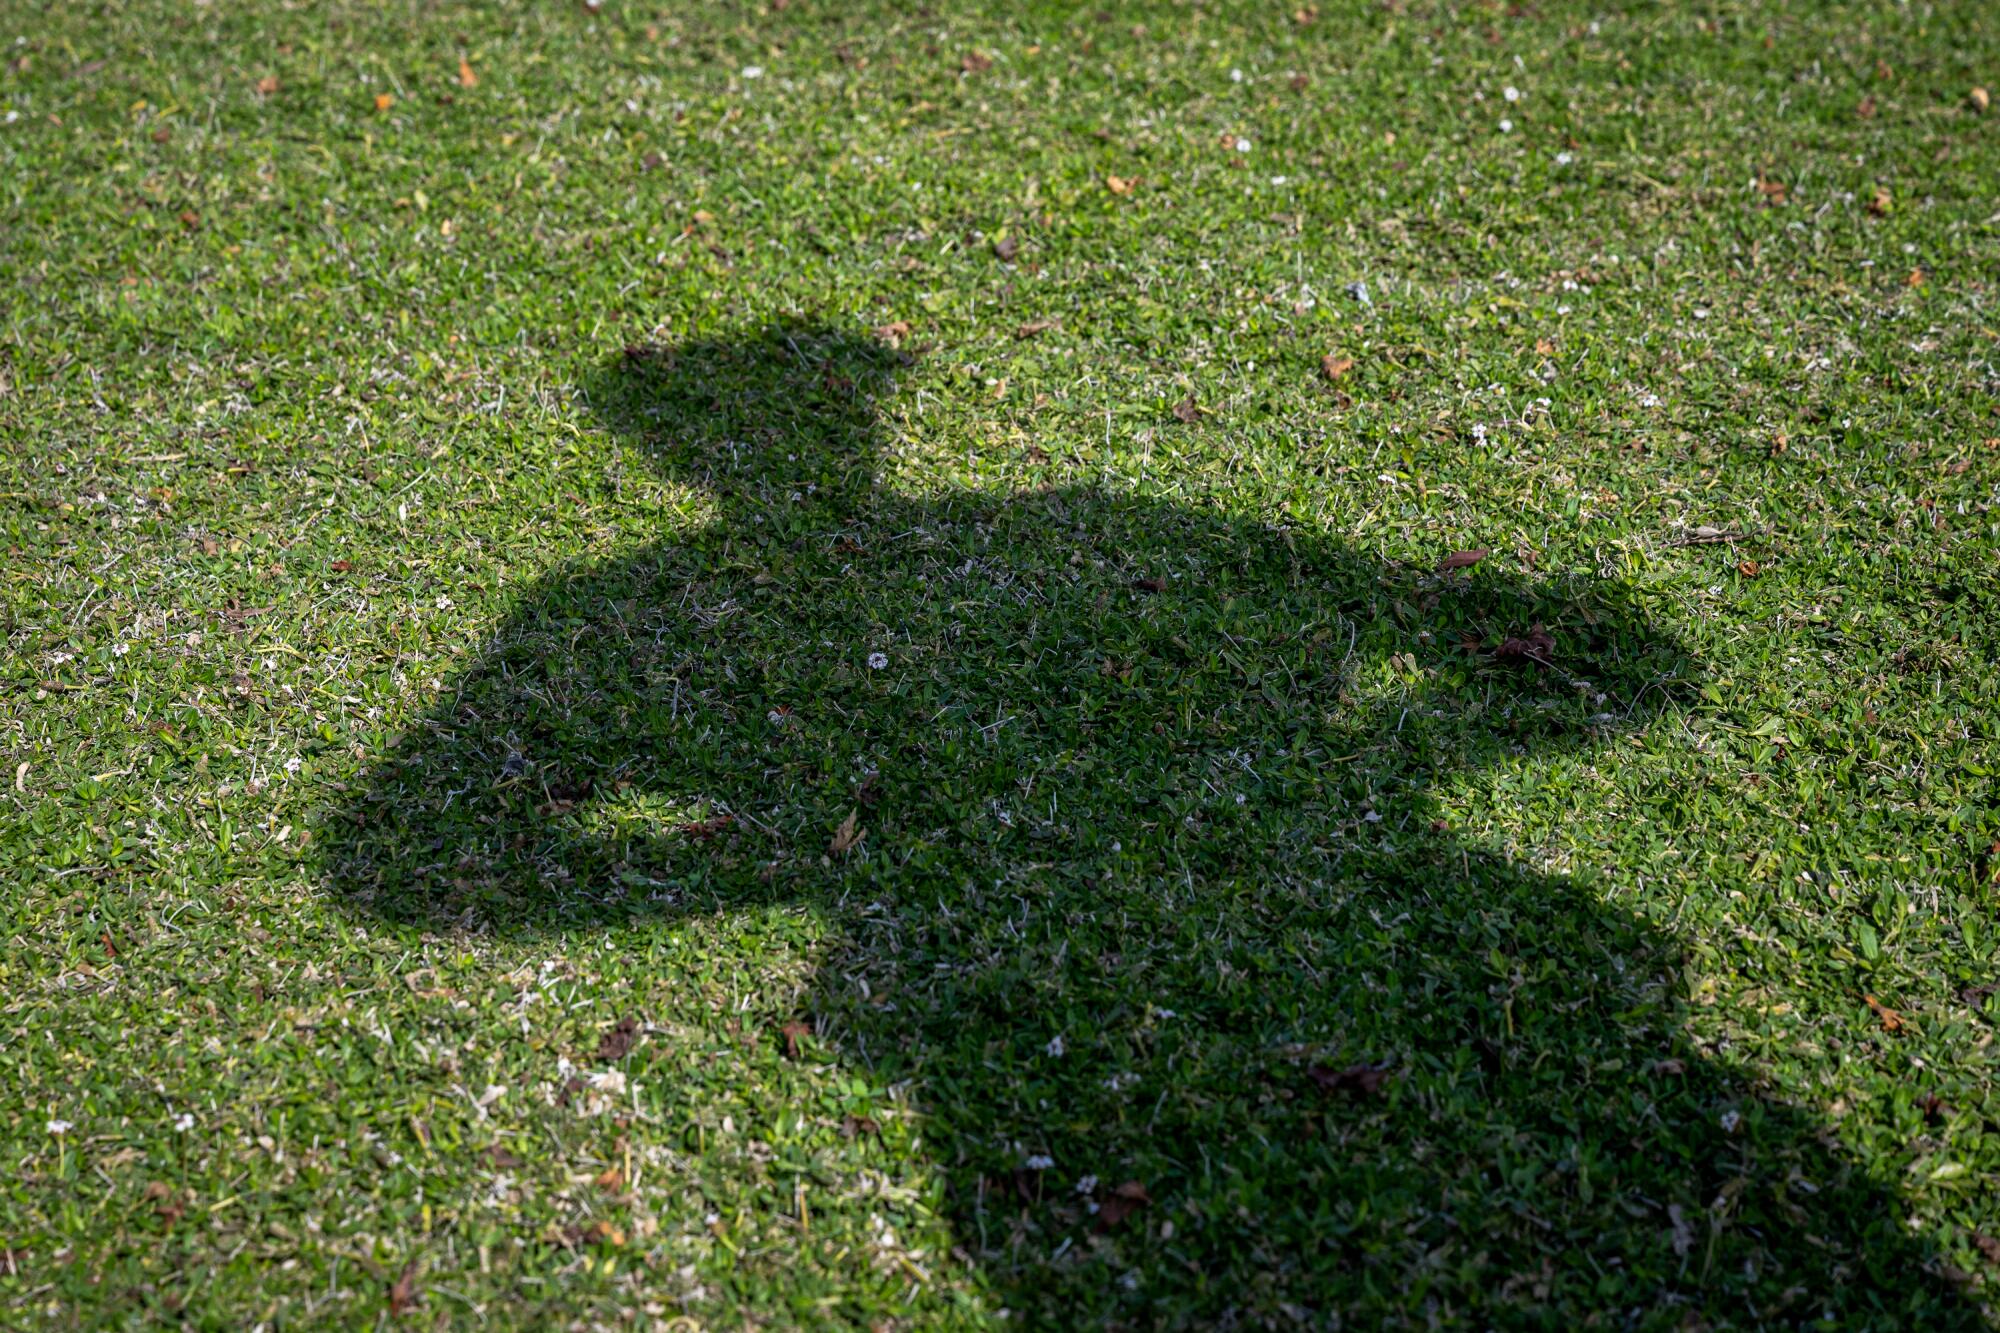 The shadow of someone wearing a baseball cap with their hands on their hips, cast upon a lush green lawn.